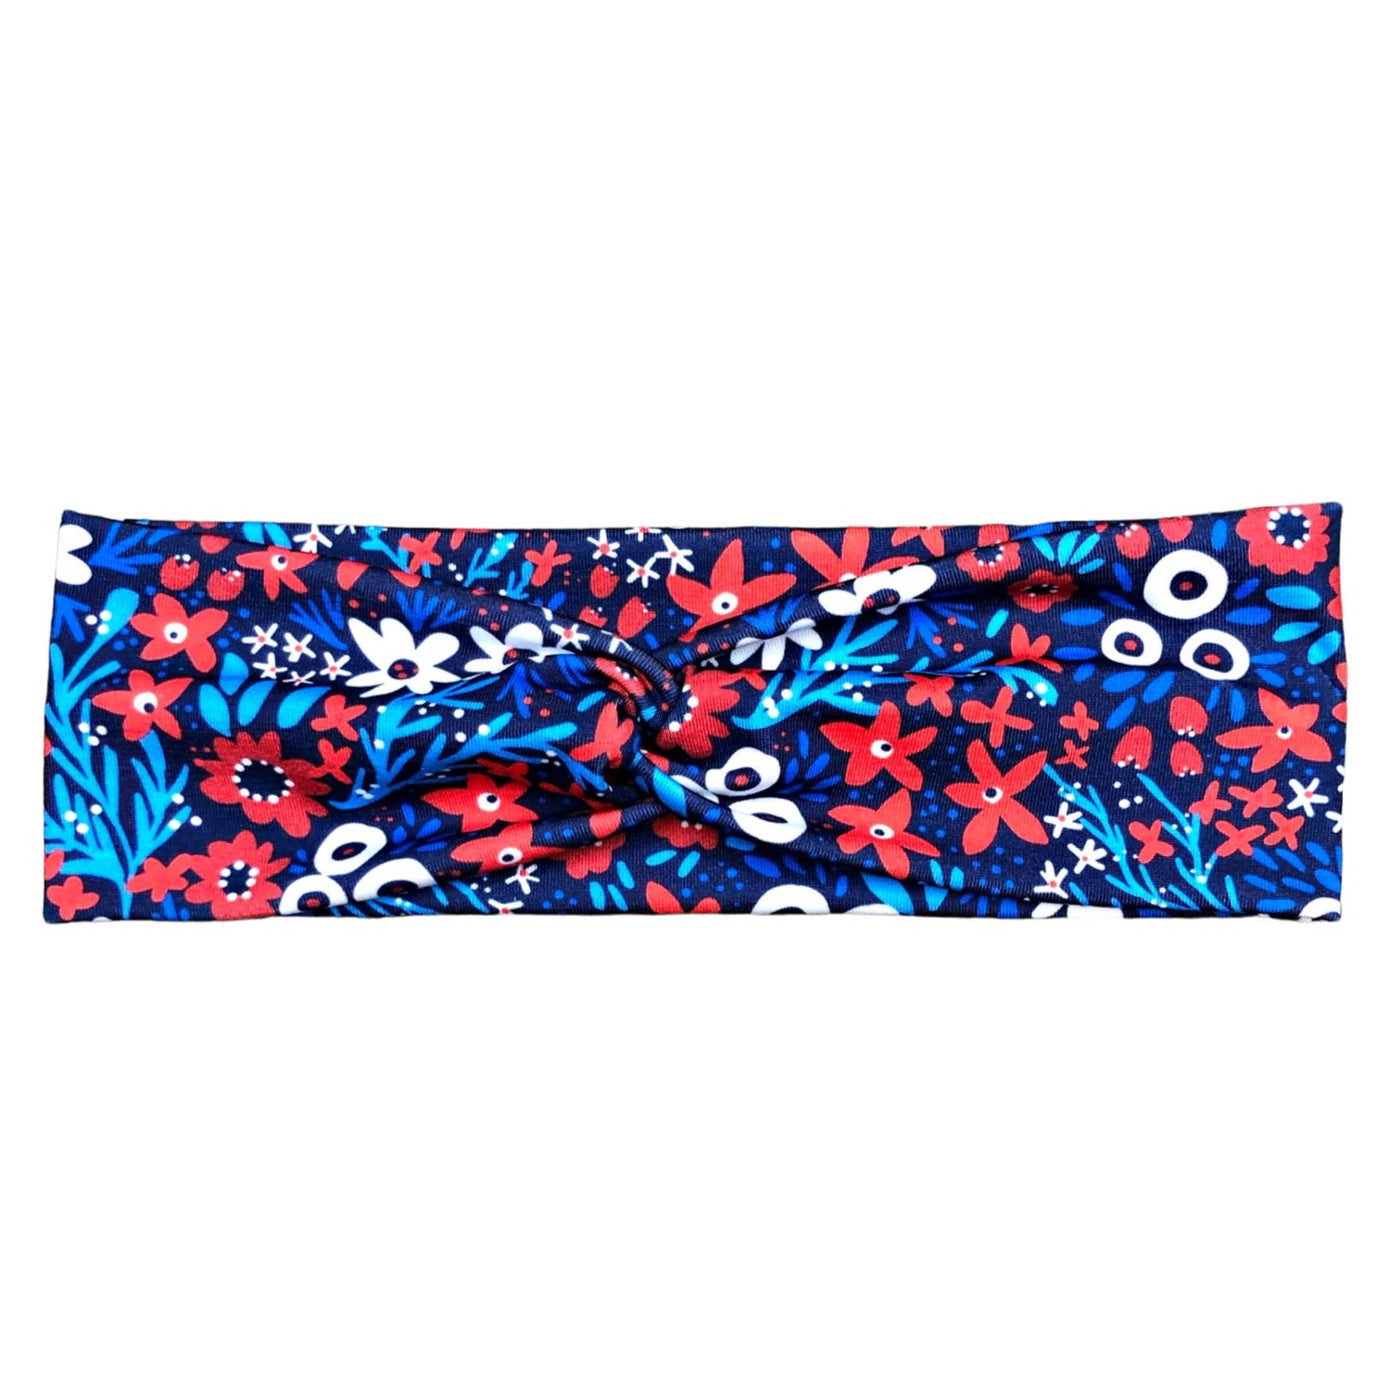 Patriotic Flower Headband for Women, Red White and Blue